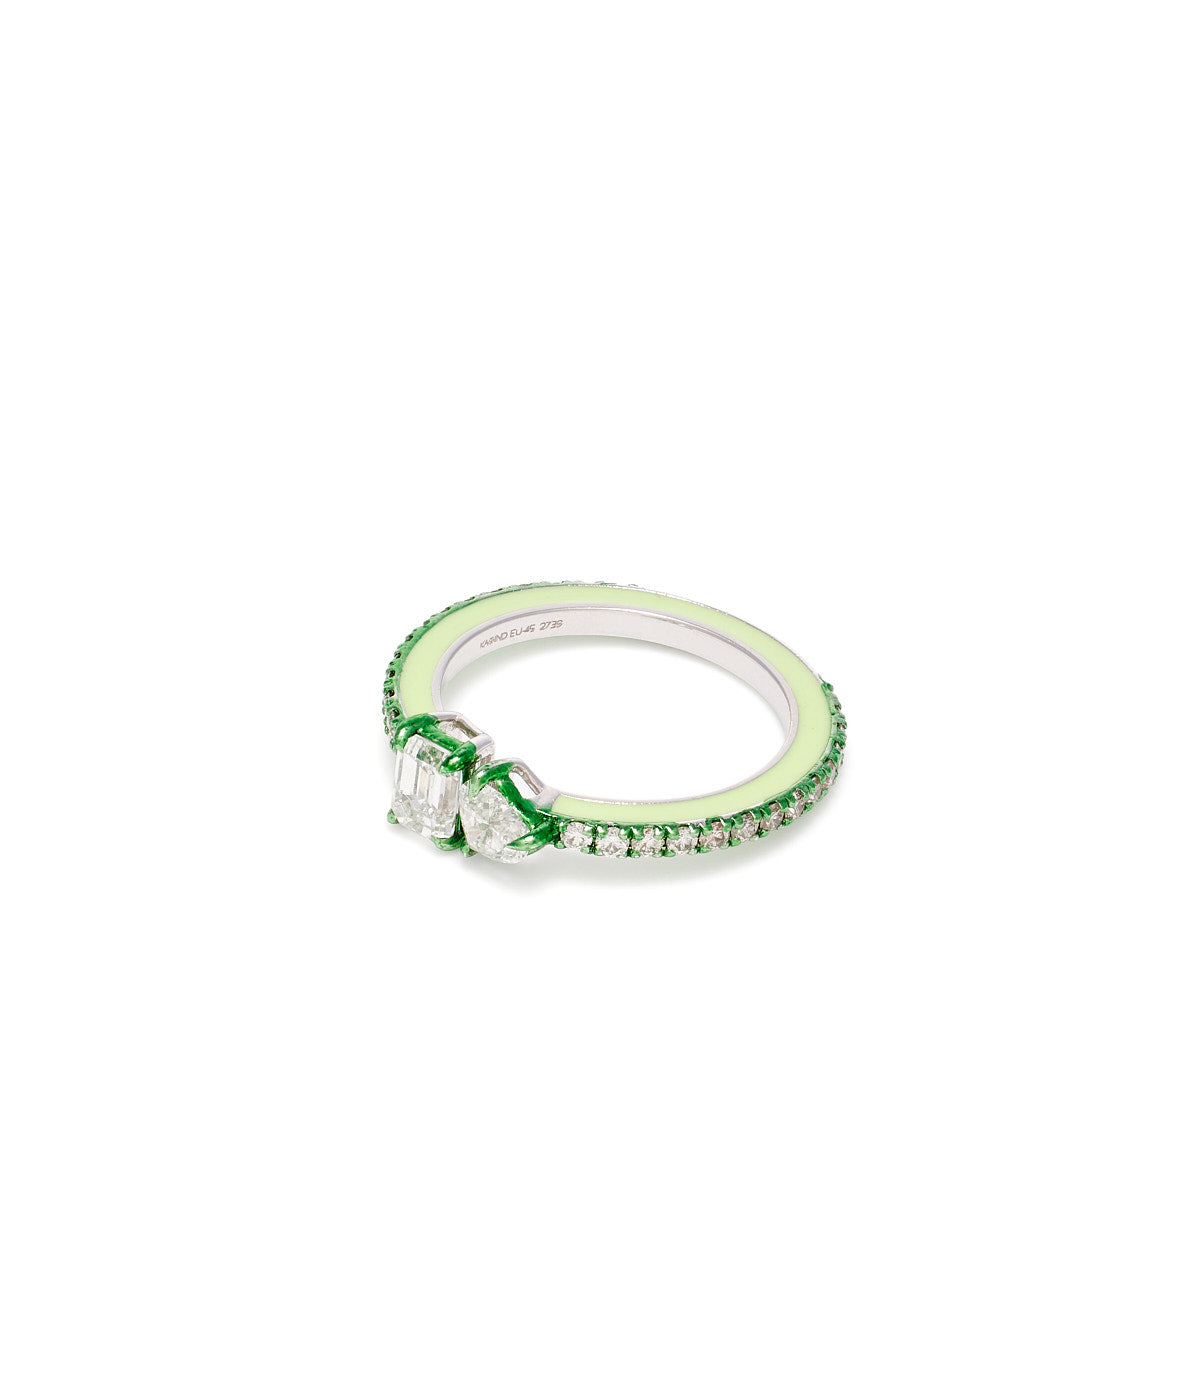 The power puff 18k white gold emerald heart pinky ring